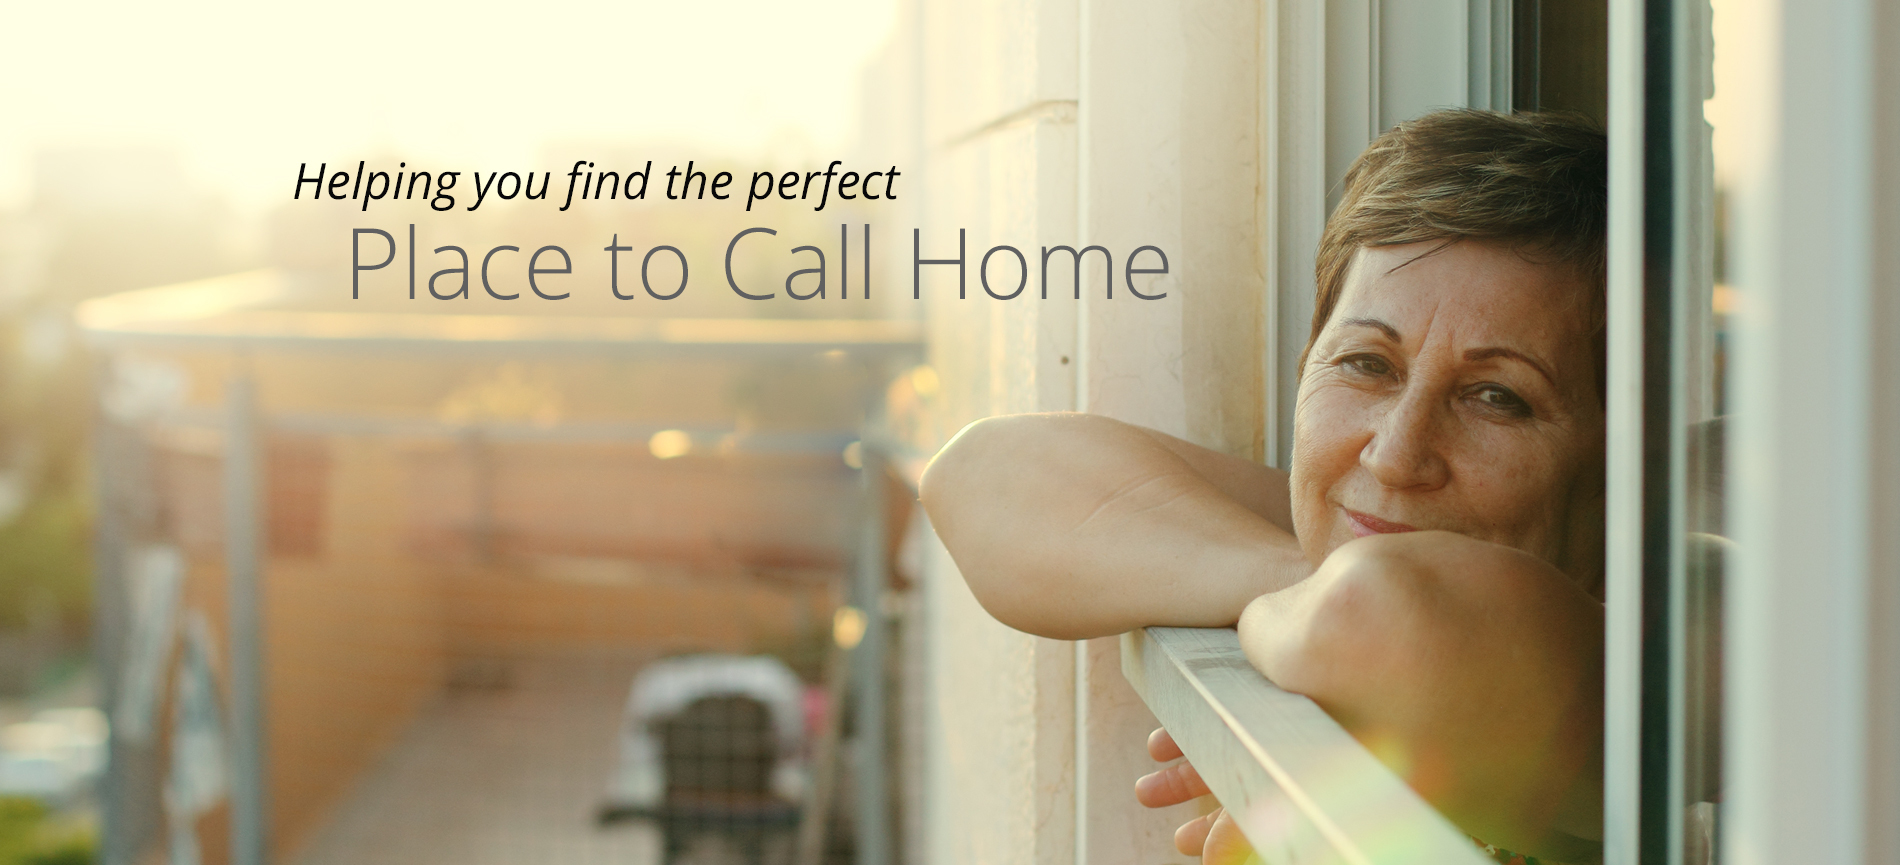 Helping you find the perfect place to call home.